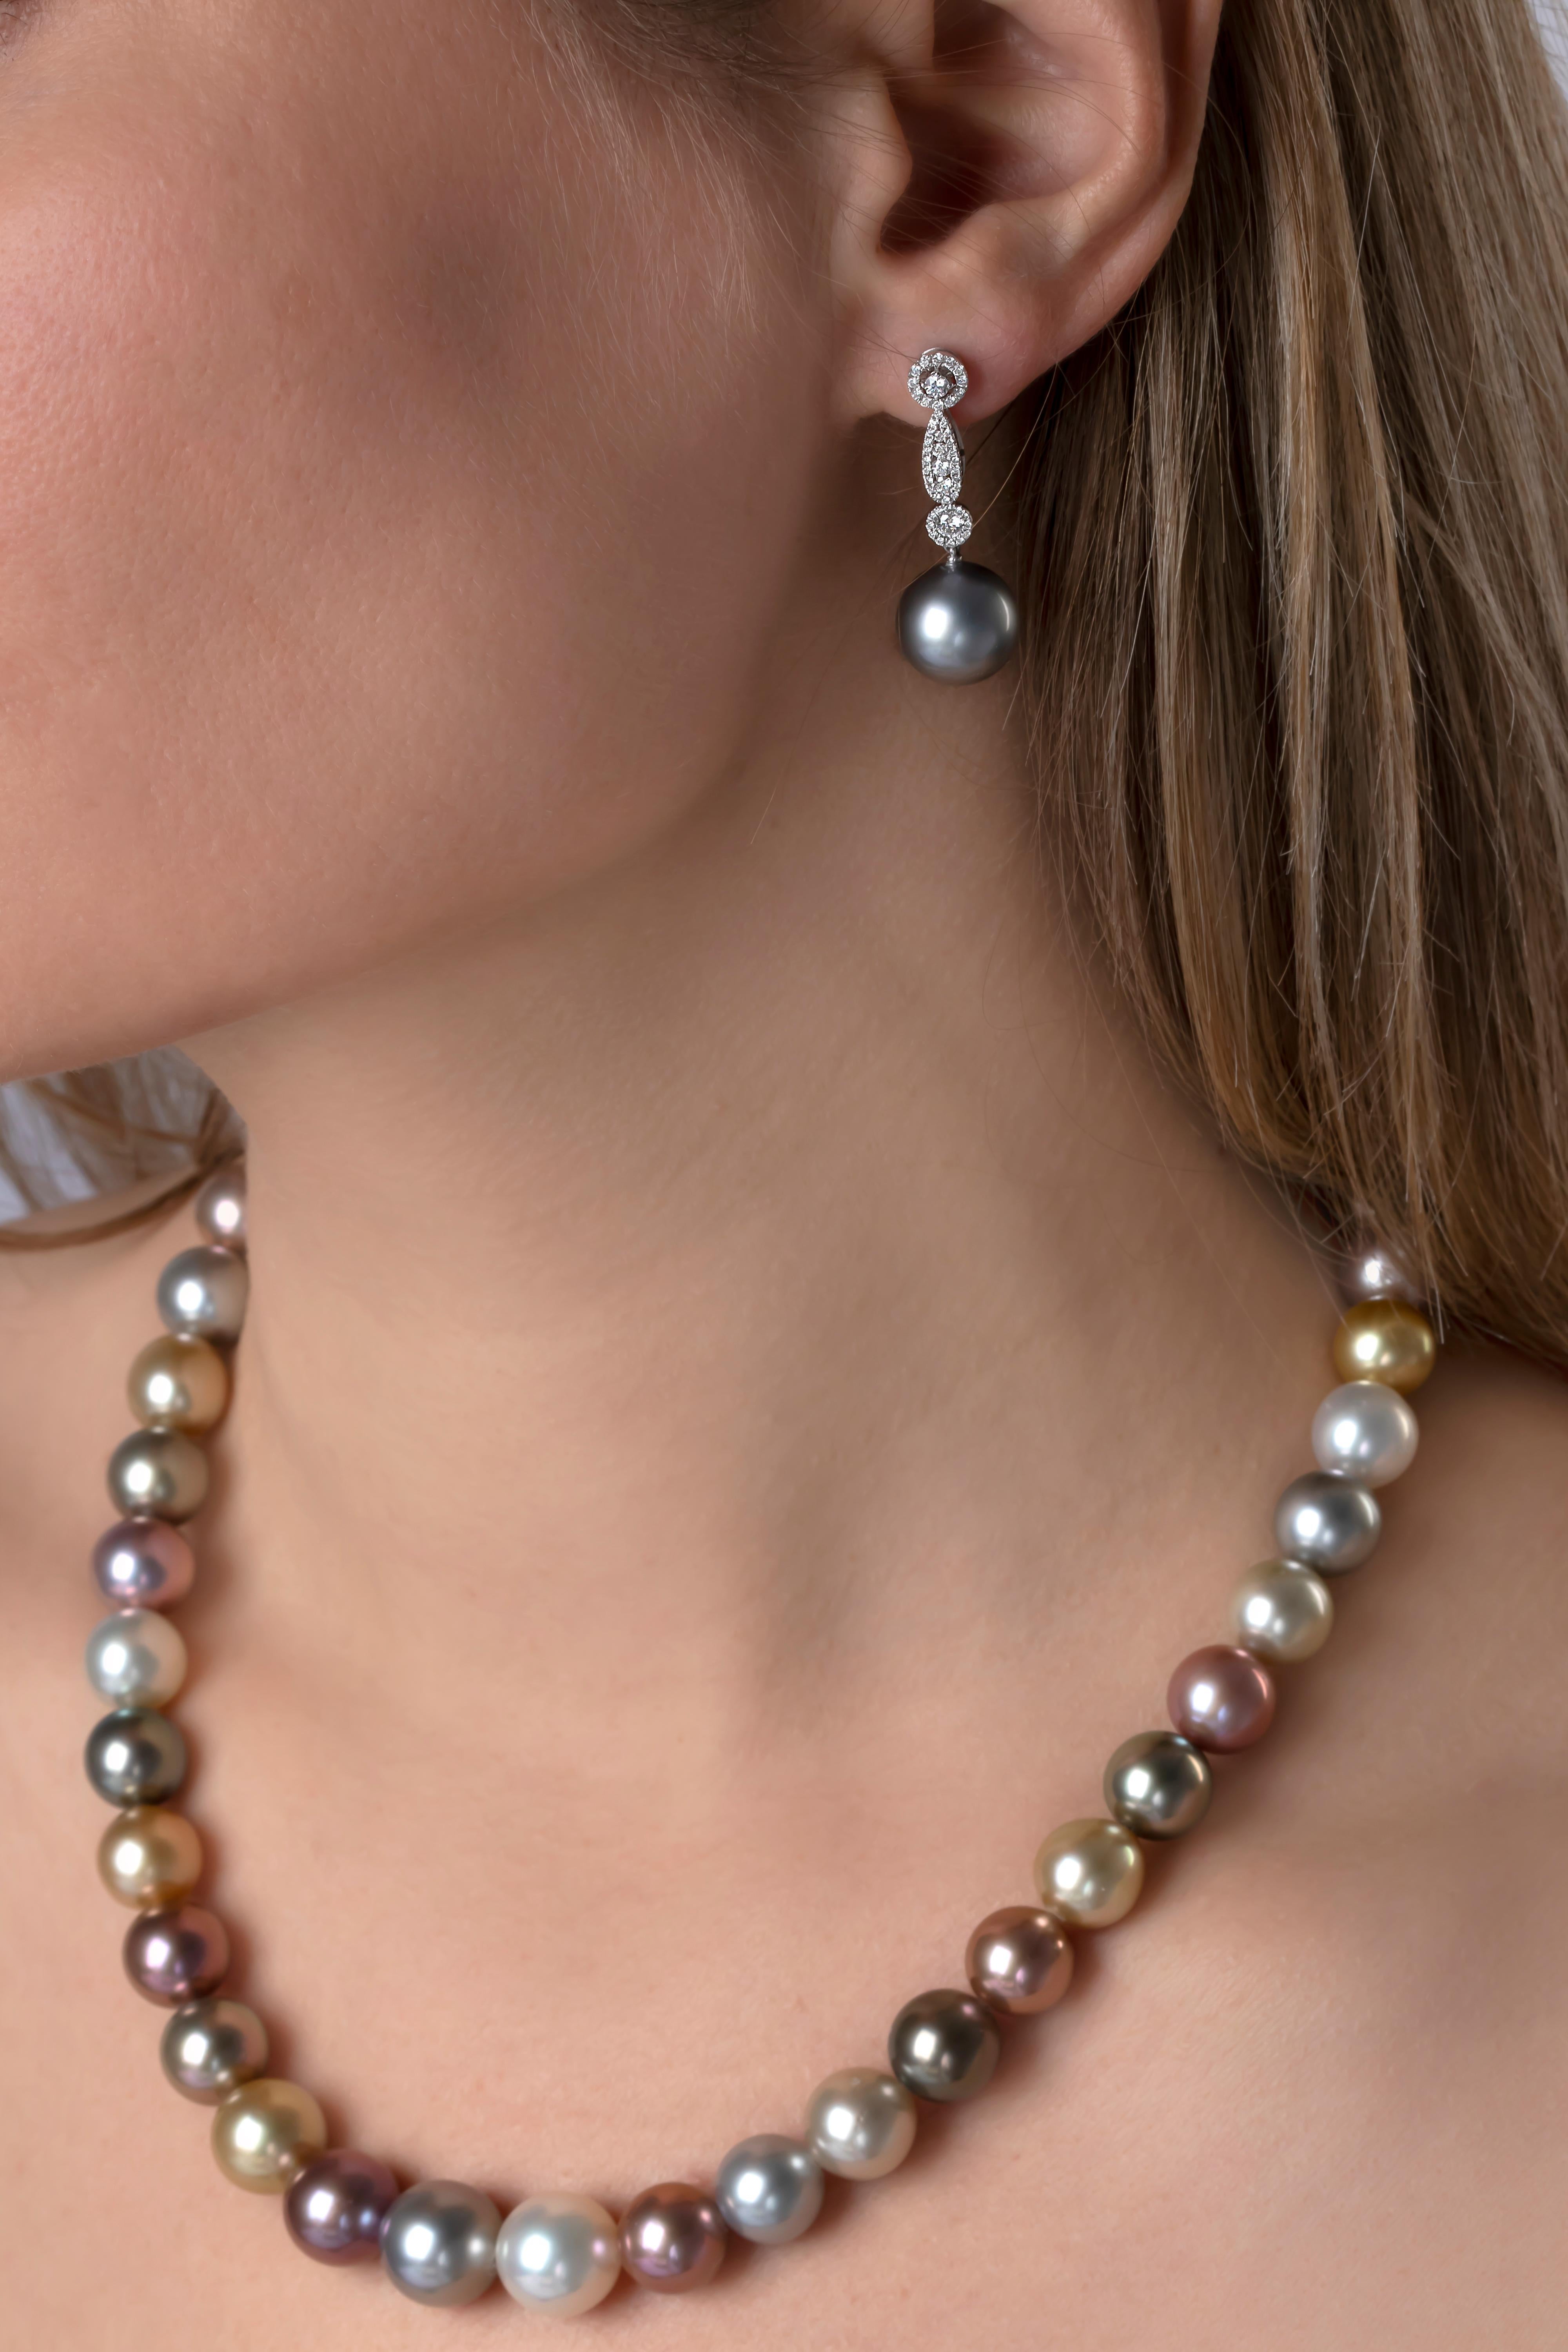 These elegant earrings by Yoko London feature cool grey Tahitian pearls beneath a dazzling arrangement of diamonds. Striking and sophisticated, these earrings will add a touch of glamour to any evening outfit.  
-12-13mm Tahitian Pearls 
-100